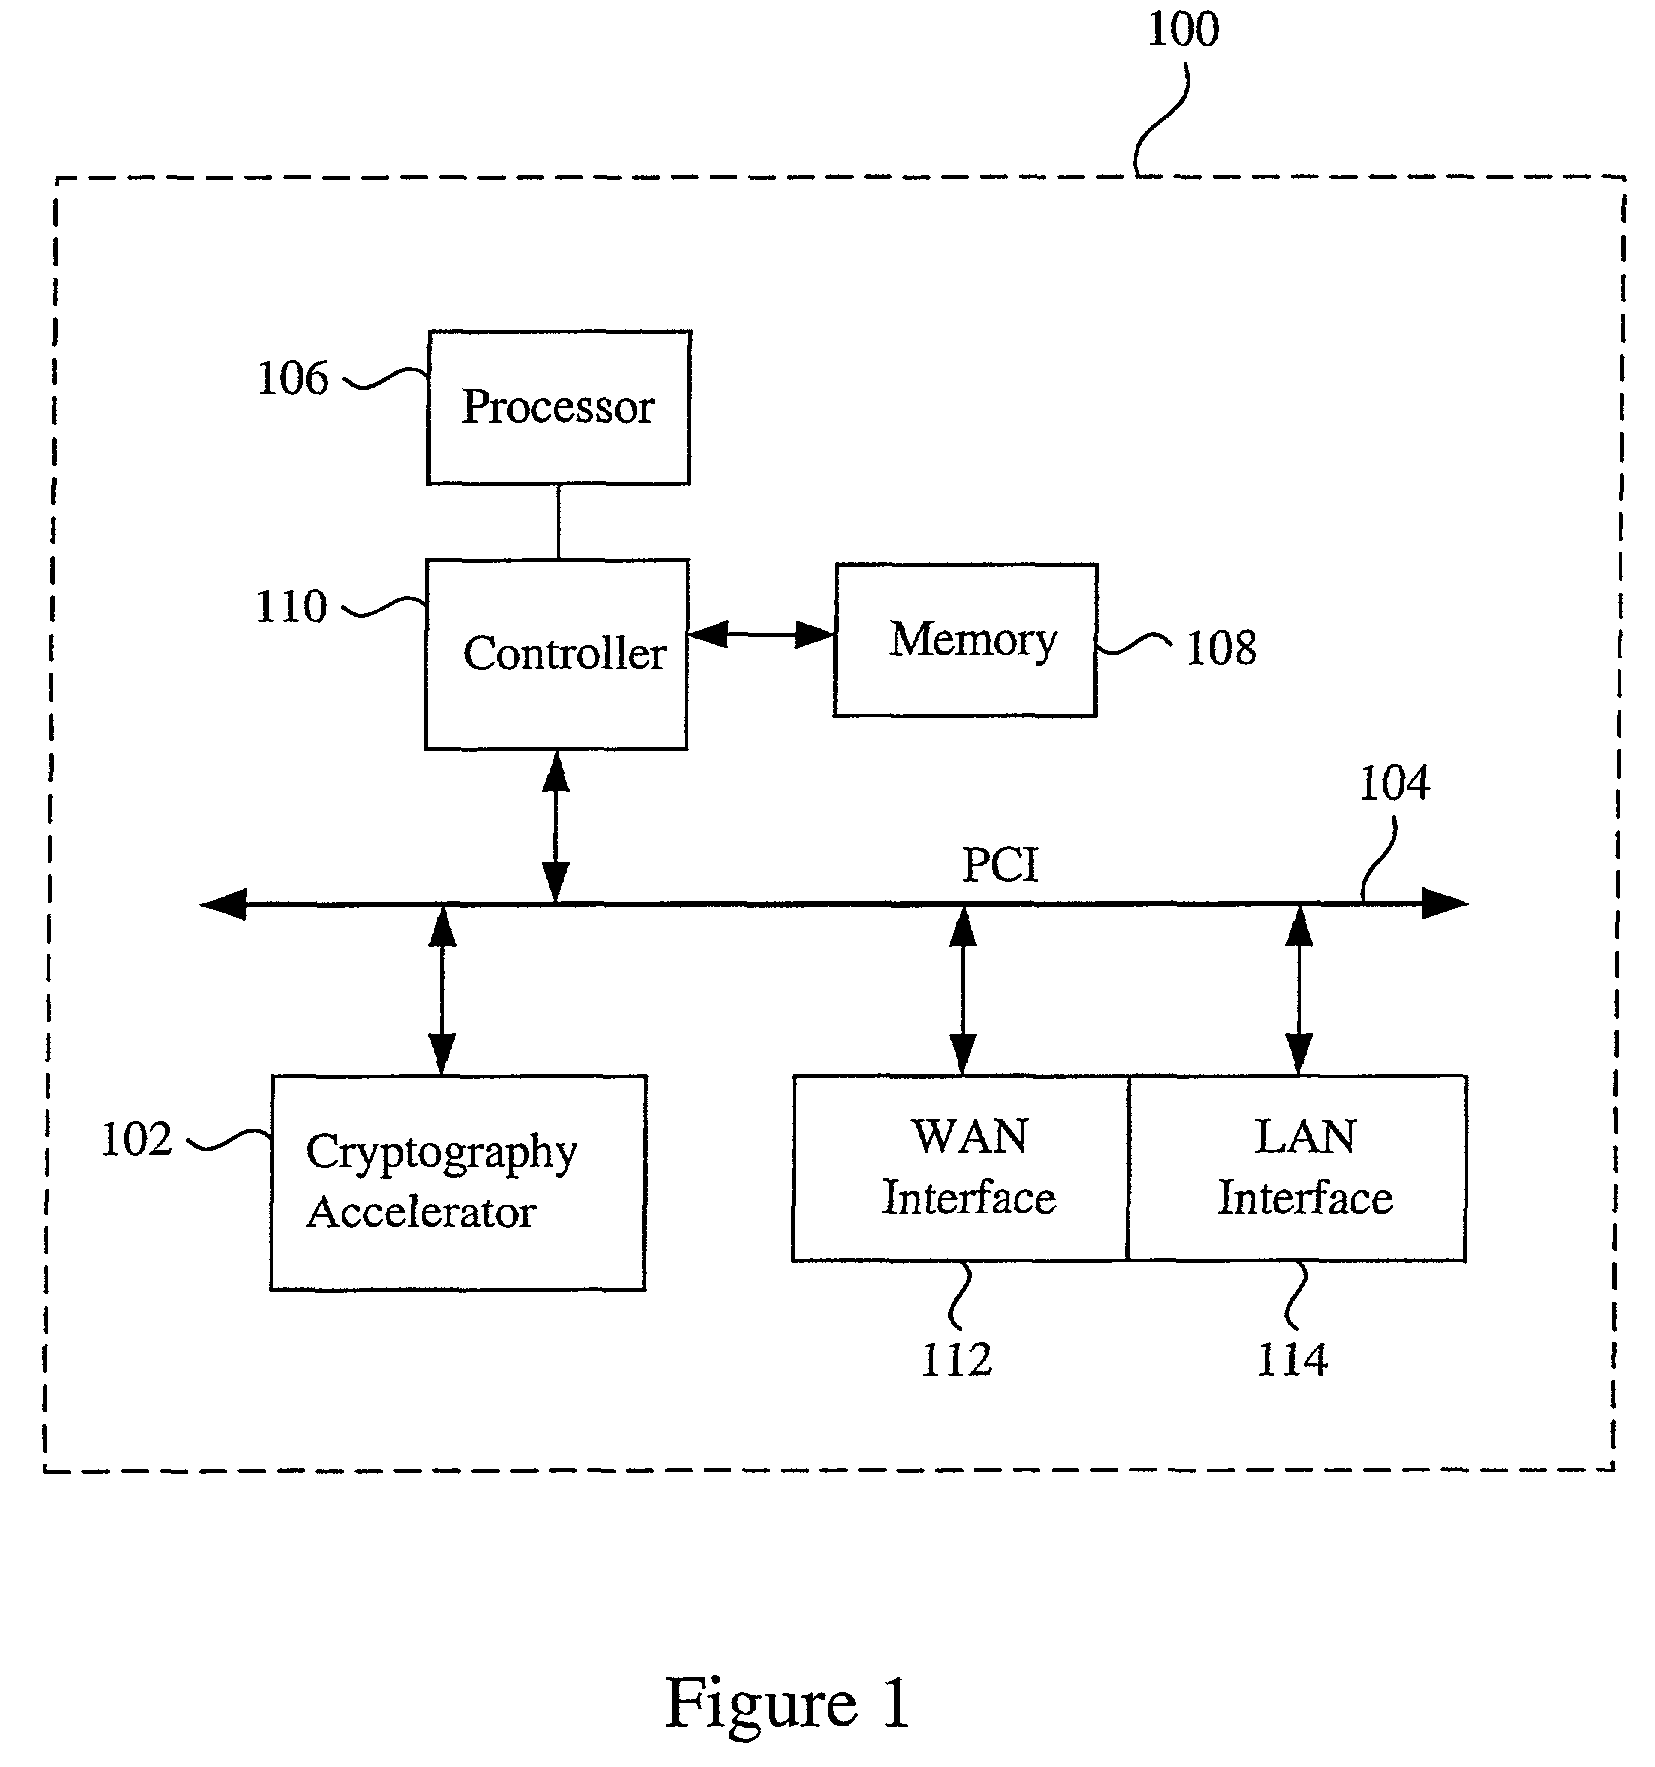 Data transfer efficiency in a cryptography accelerator system